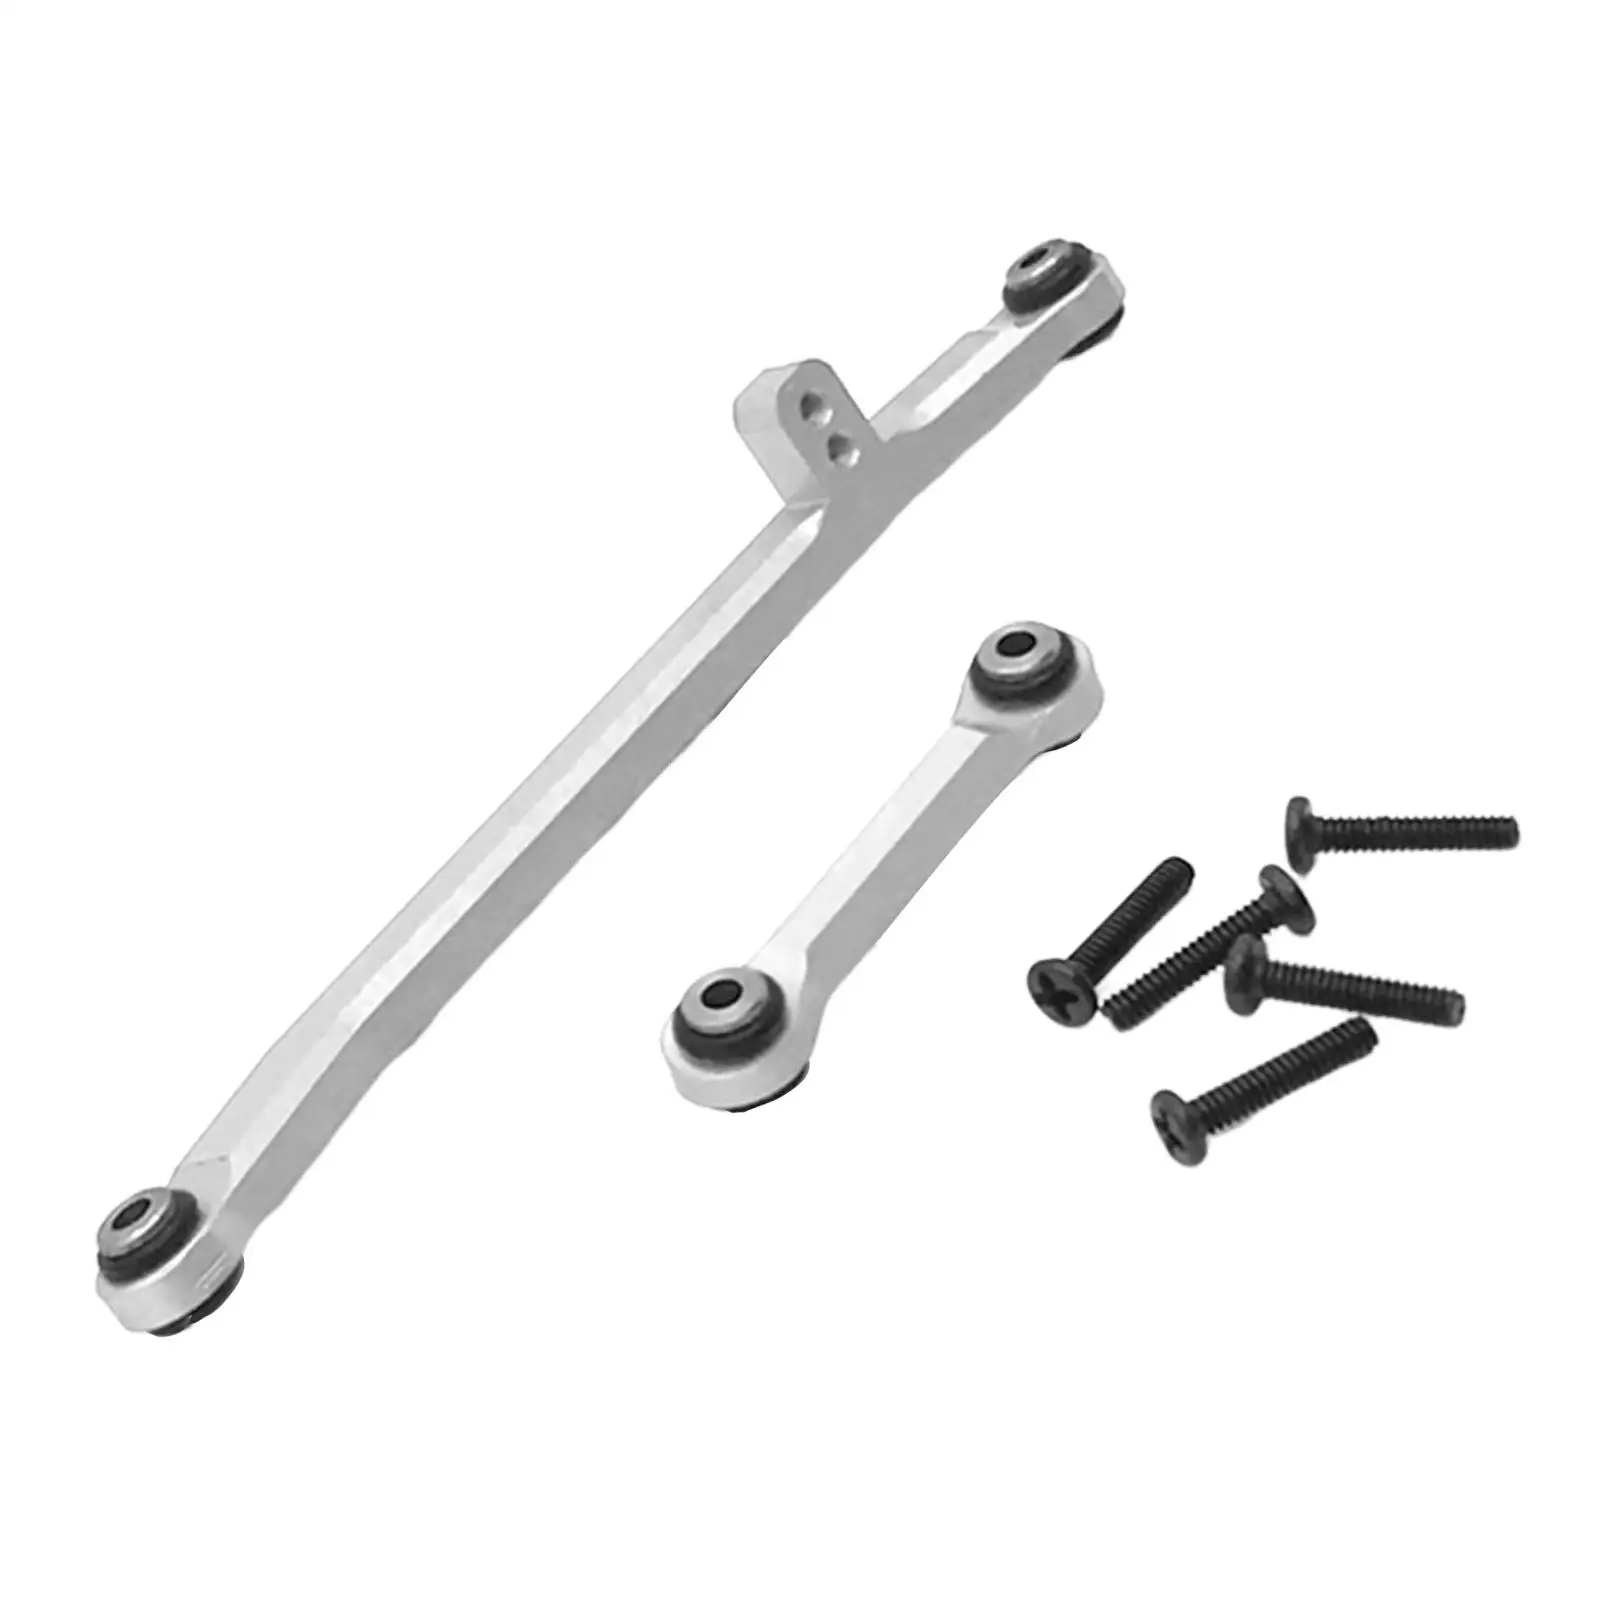 2 Pieces Steering Link Rods, Replacement for Axial SCX24 90081 RC Off Road Car Upgrade